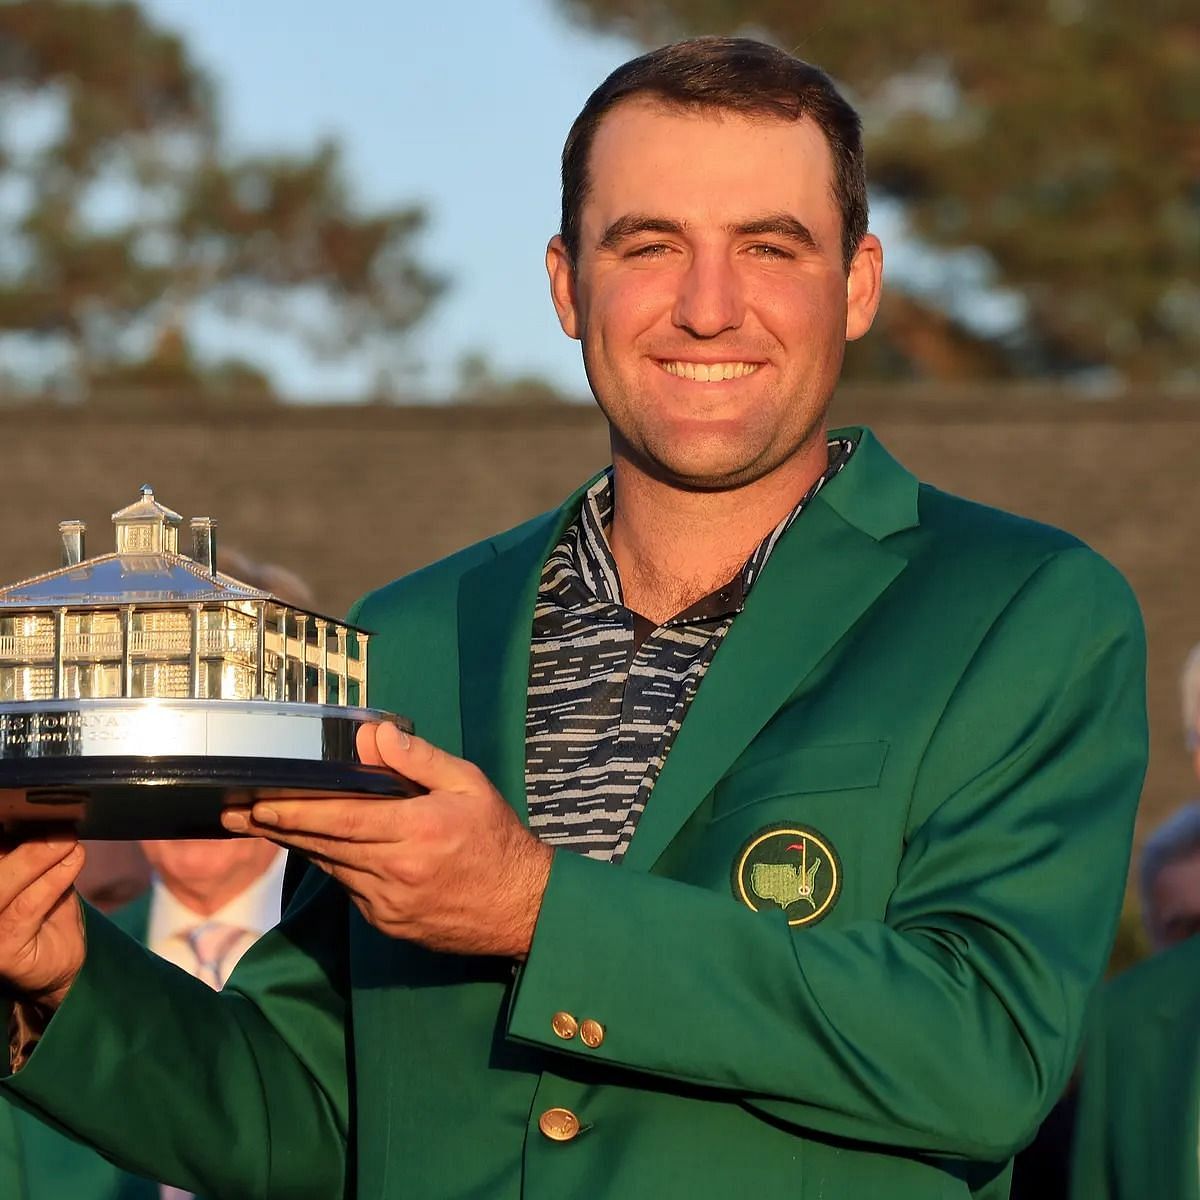 Scheffler won his first major at the Masters 2022